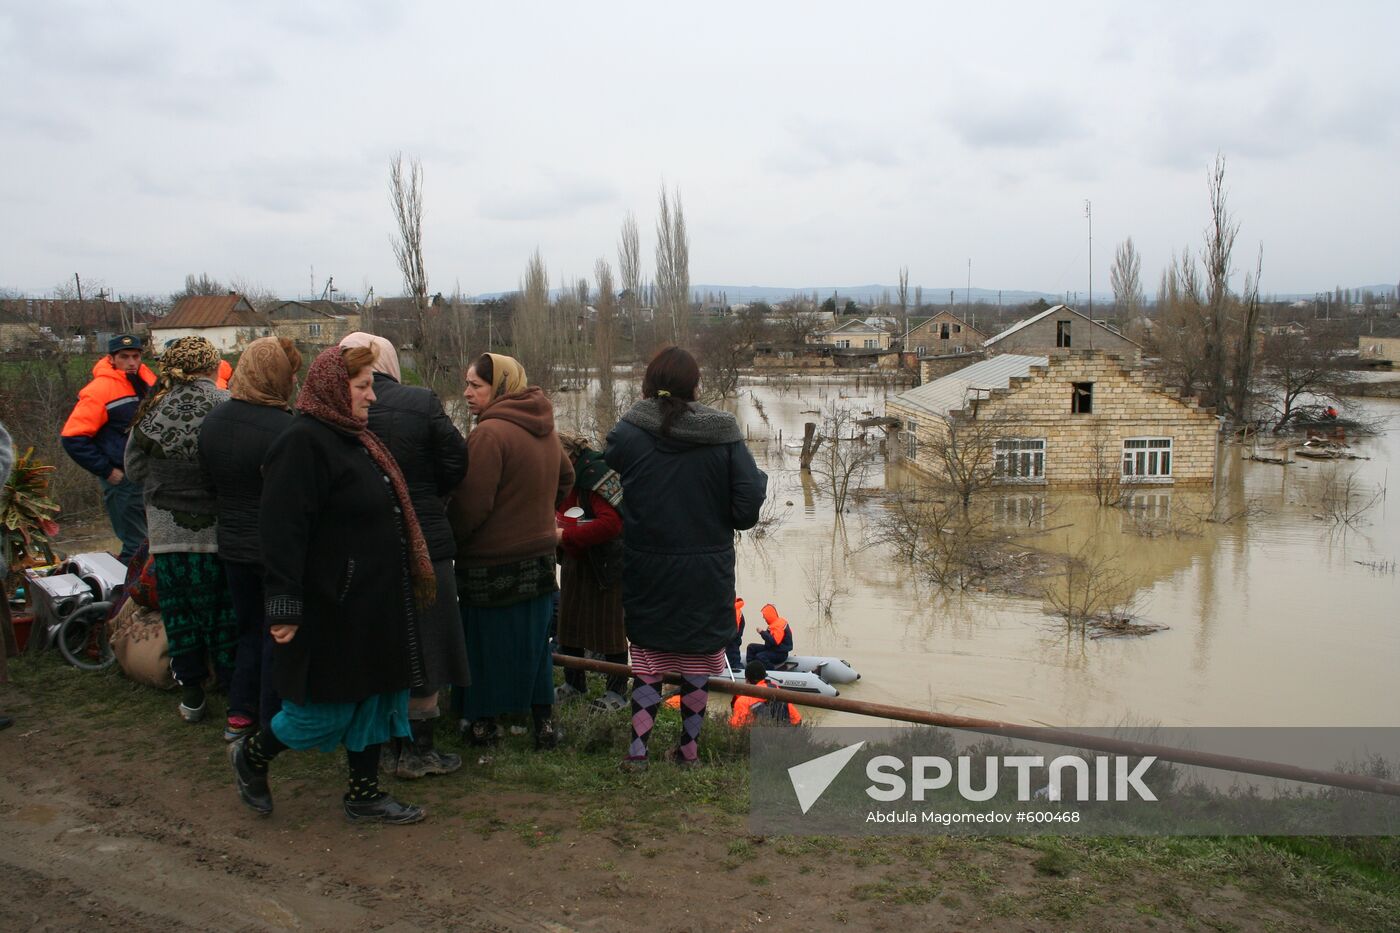 Dagestan's Mamedkala village residents cope with flood